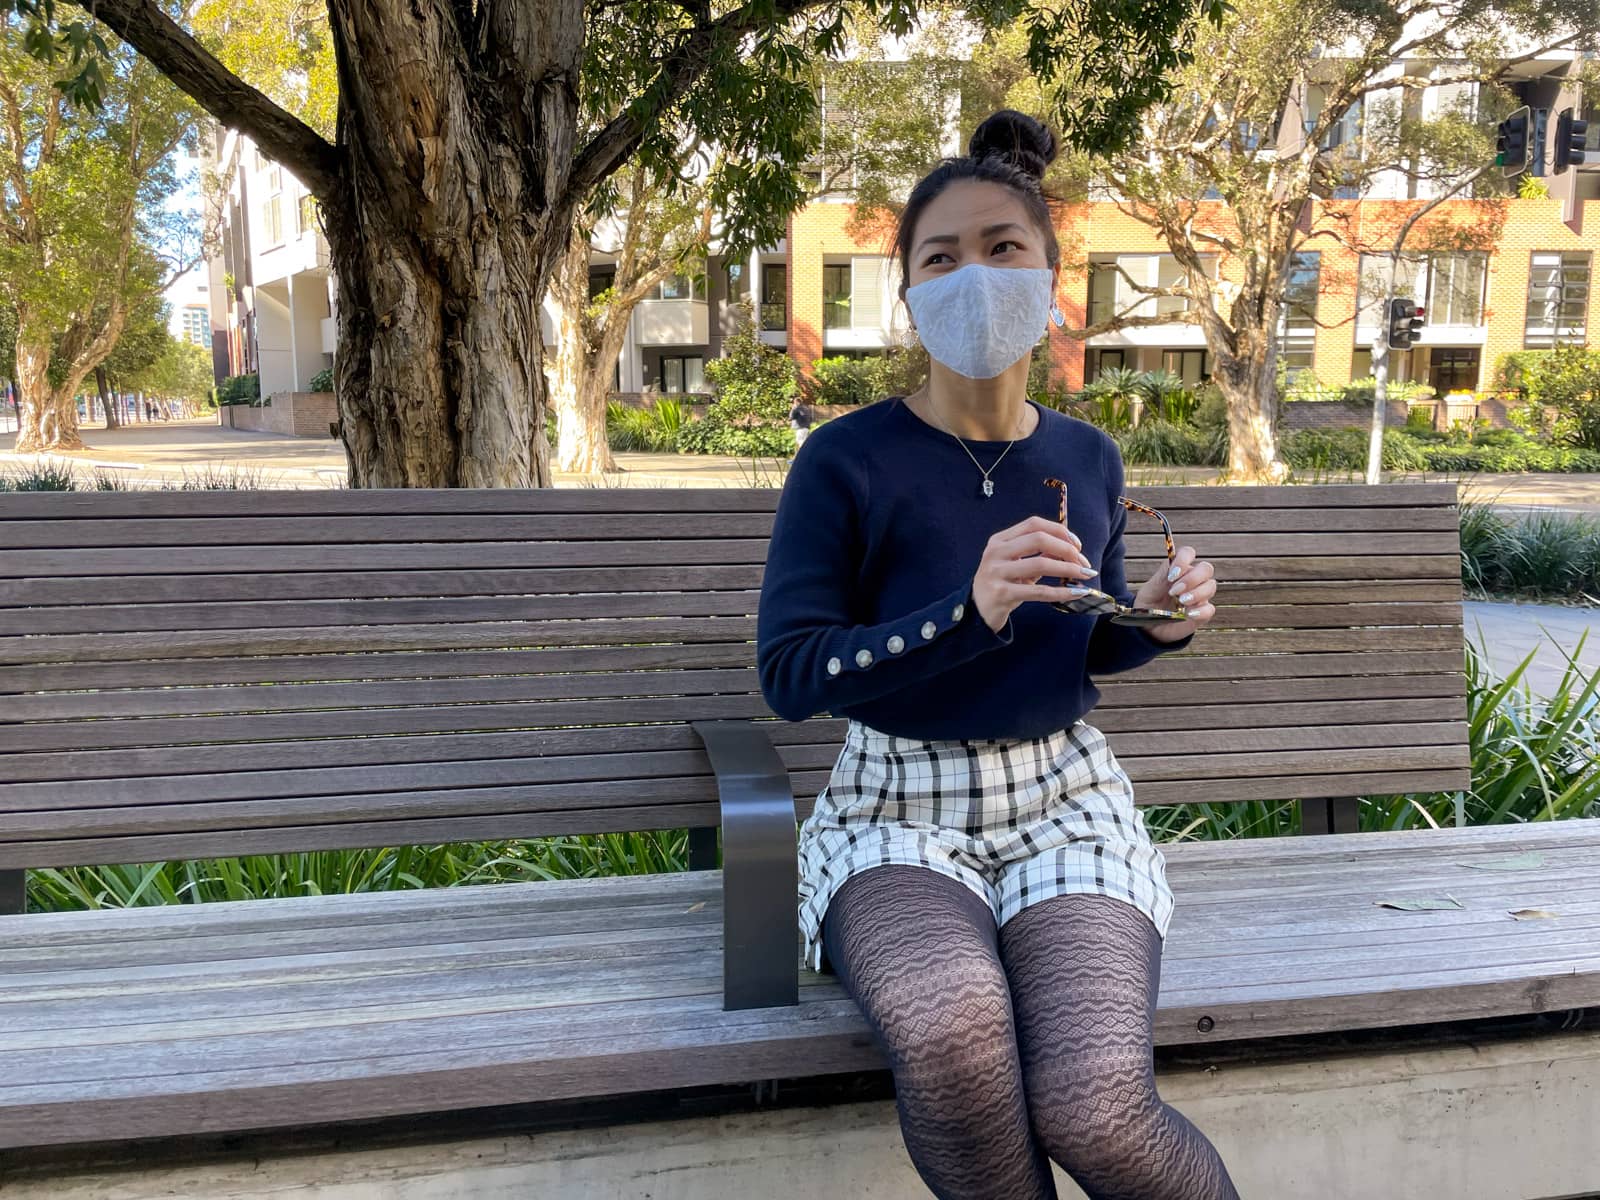 An Asian woman sitting on a wooden bench. She has dark hair tied back in a high bun. She is wearing a navy sweater with button details on the lower part of the sleeves, black and white checkered shorts, and lace patterned tights. She is wearing a lace face covering over her nose and mouth, and is holding a pair of round sunglasses in her hands.